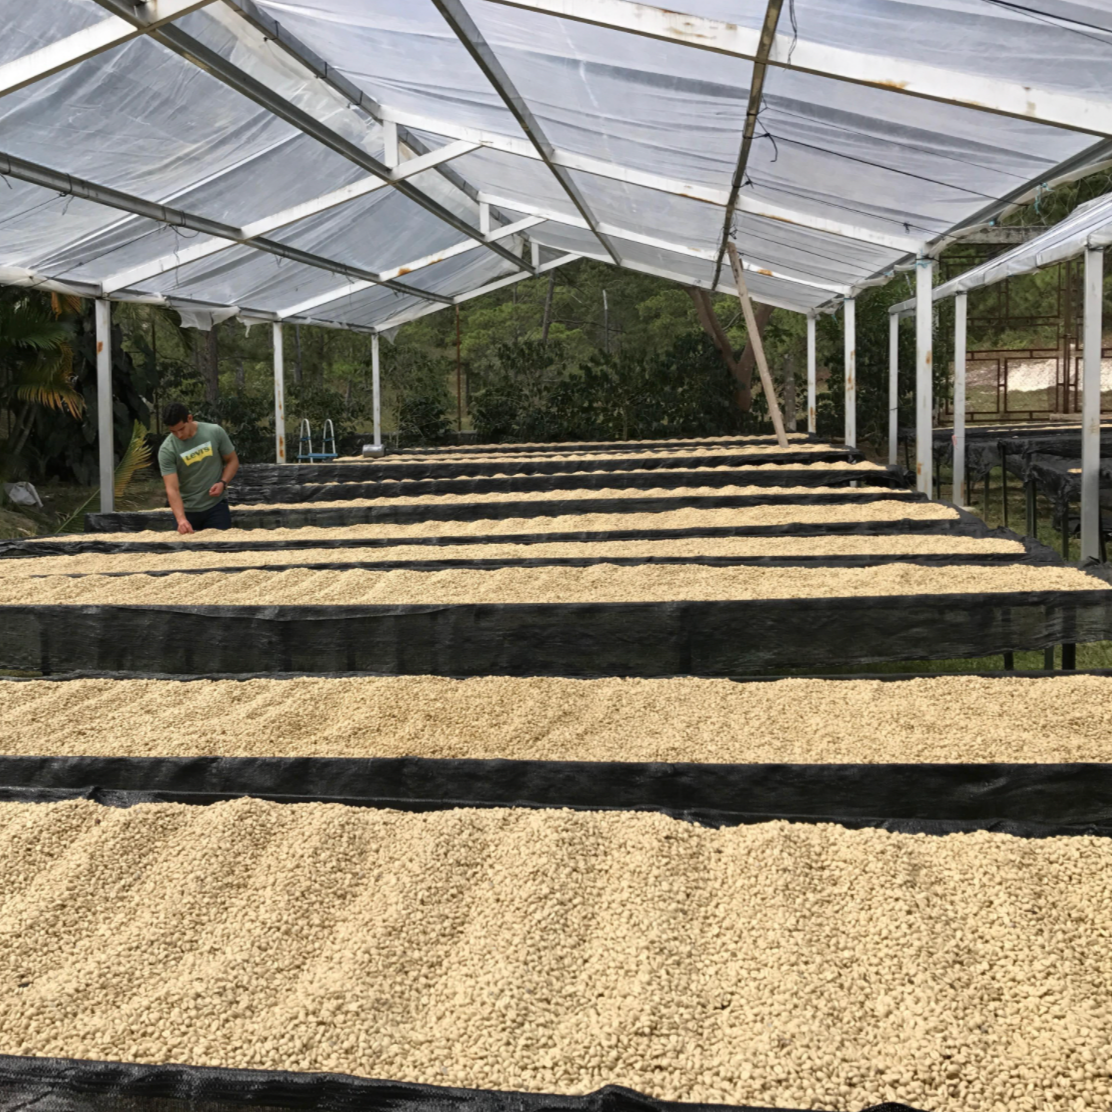 Coffee drying beds at Caballero